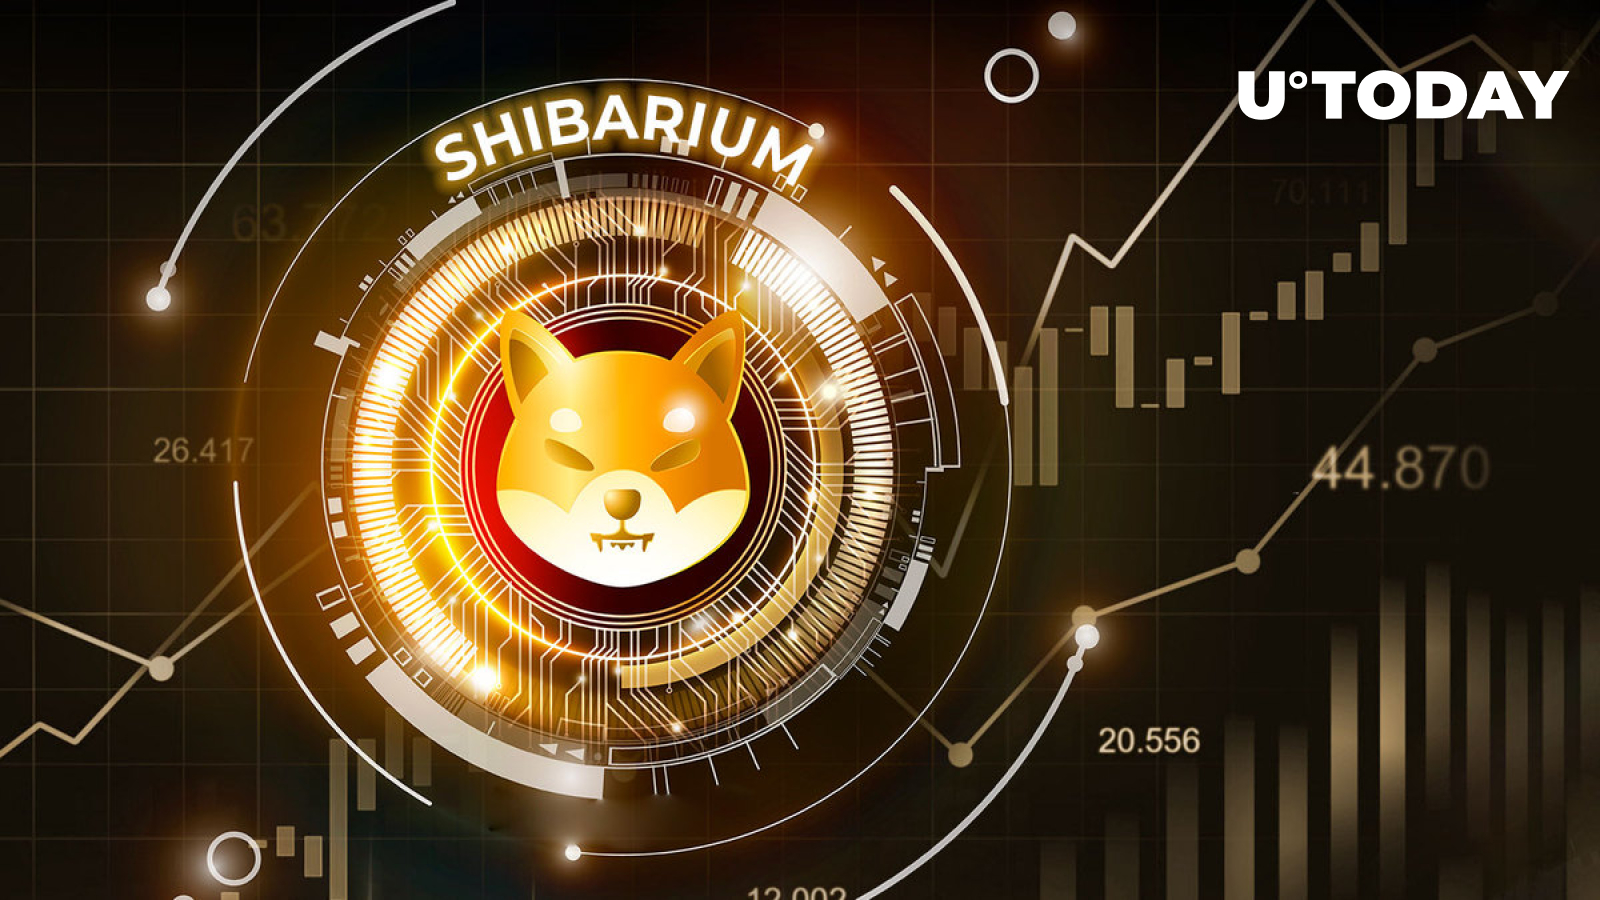 Shibarium on Verge of Major Record as Transactions Shoot up 209%